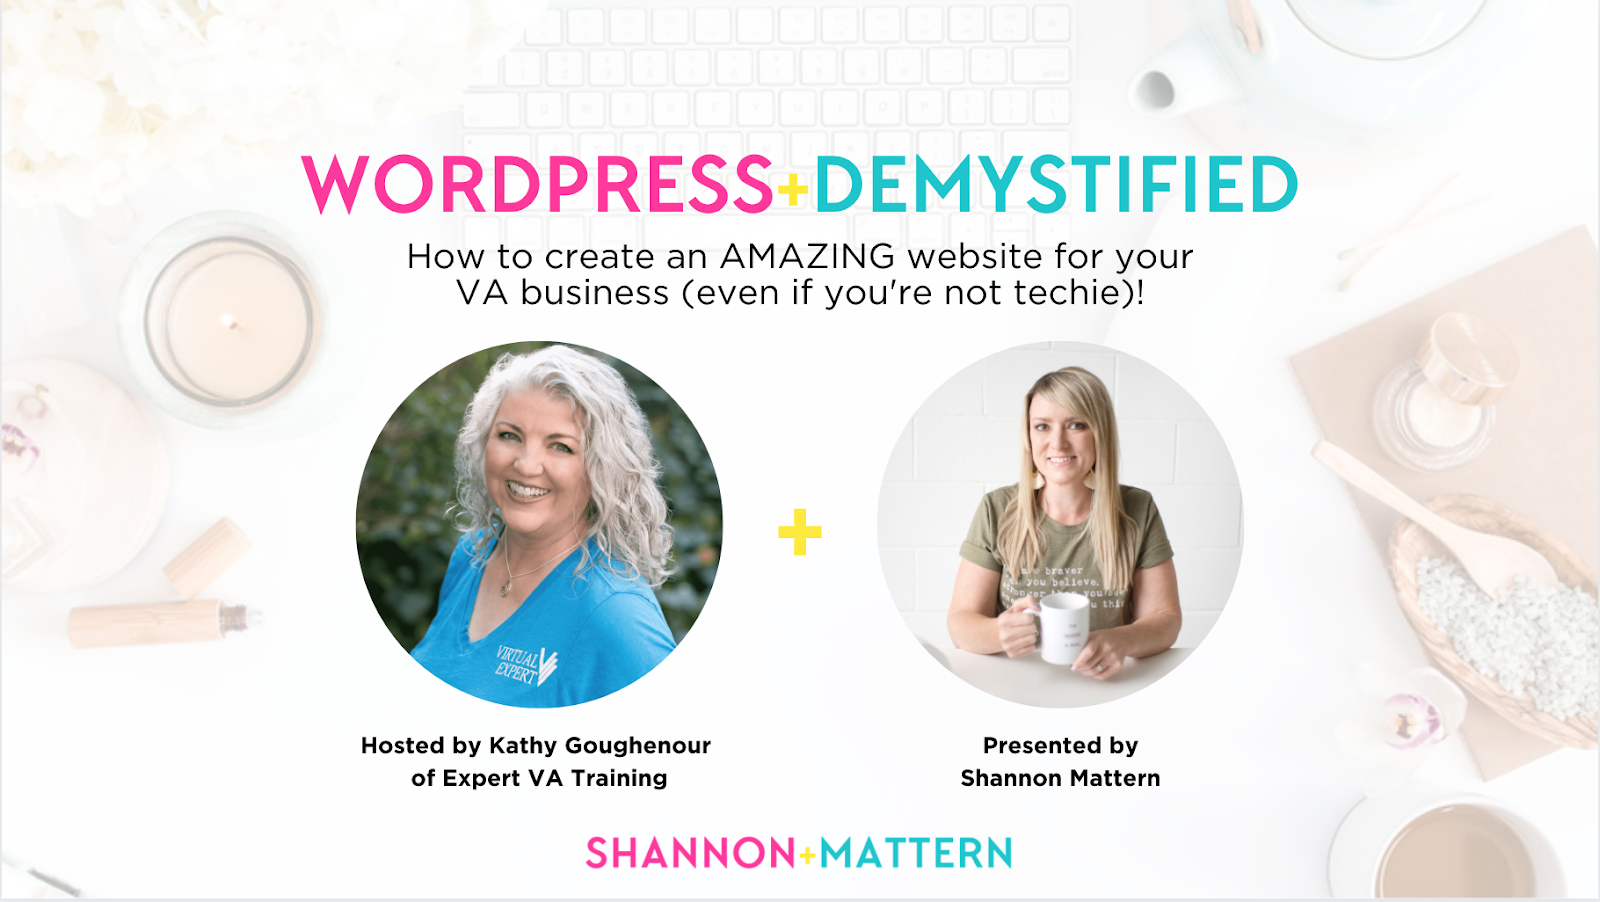 WordPress + Demystified: How to create an amazing website for your VA business (even if you're not techie)! With Kathy Goughenour of Expert VA Training and Shannon Mattern